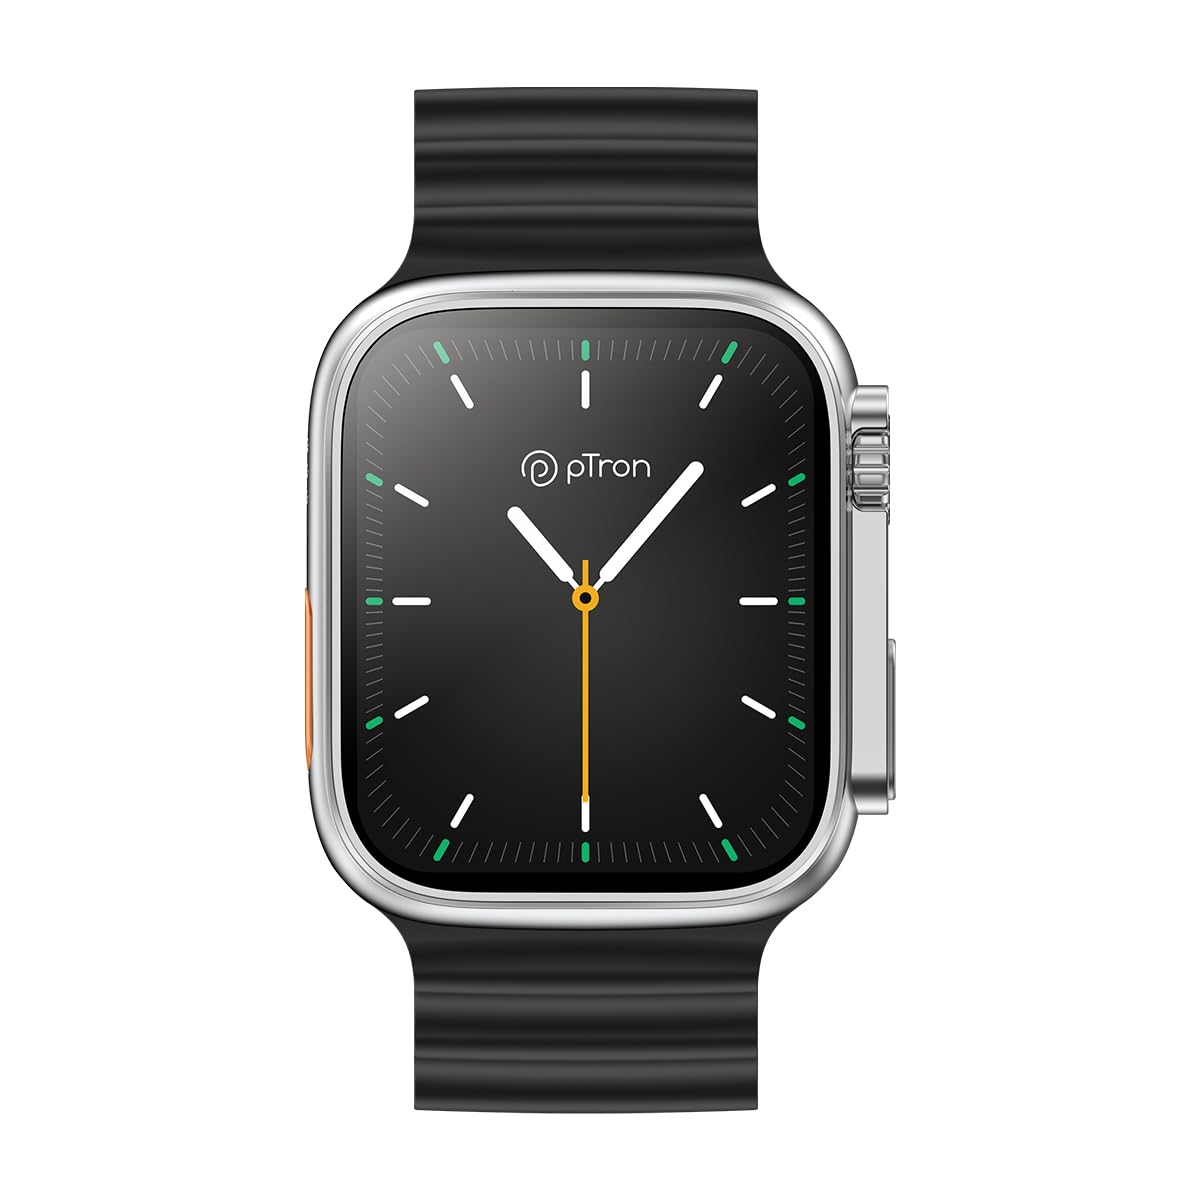 pTron Newly Launched Reflect Pro Smartwatch, Bluetooth Calling, 1.85" Full Touch Display, 600 NITS, Digital Crown, Metal Frame, 100+ Watch Faces, HR, SpO2, Voice Assist, 5 Days Battery Life (Silver)